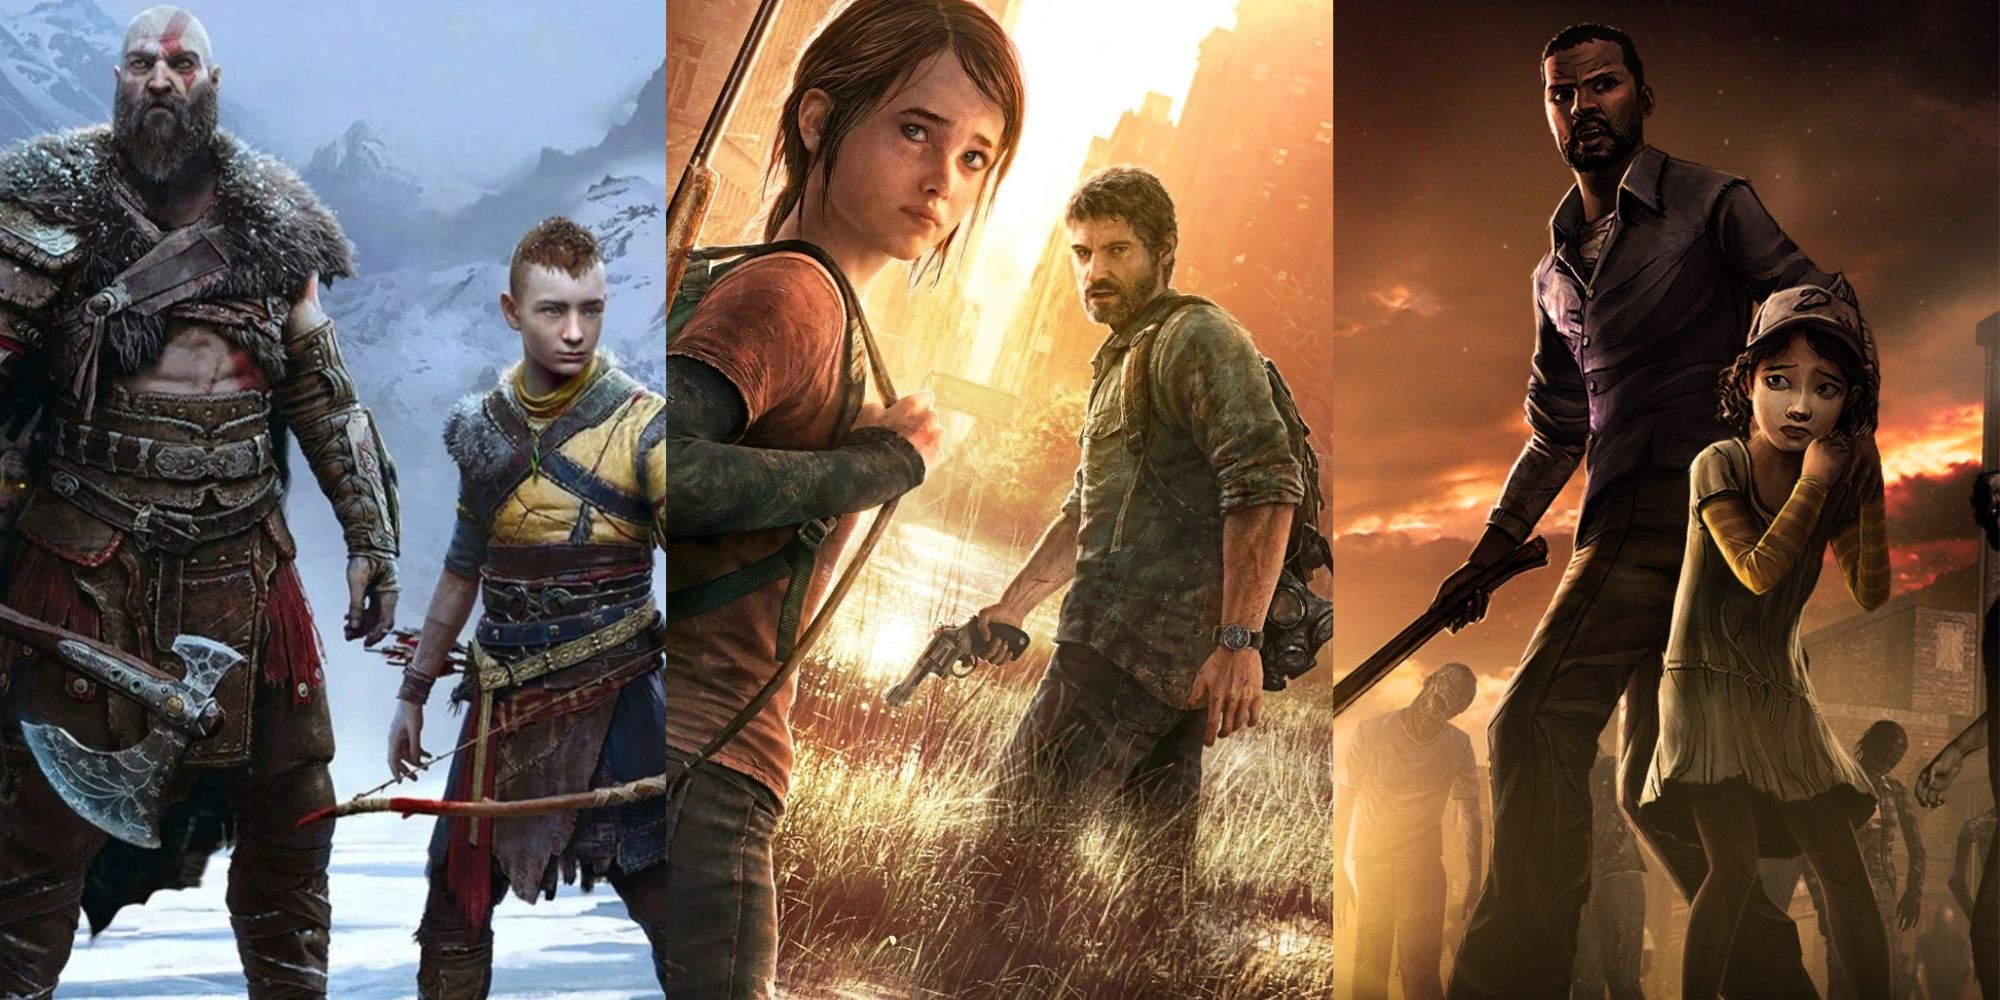 A split image of fathers and children from God of War Ragnarok, The Last of Us, and The Walking Dead